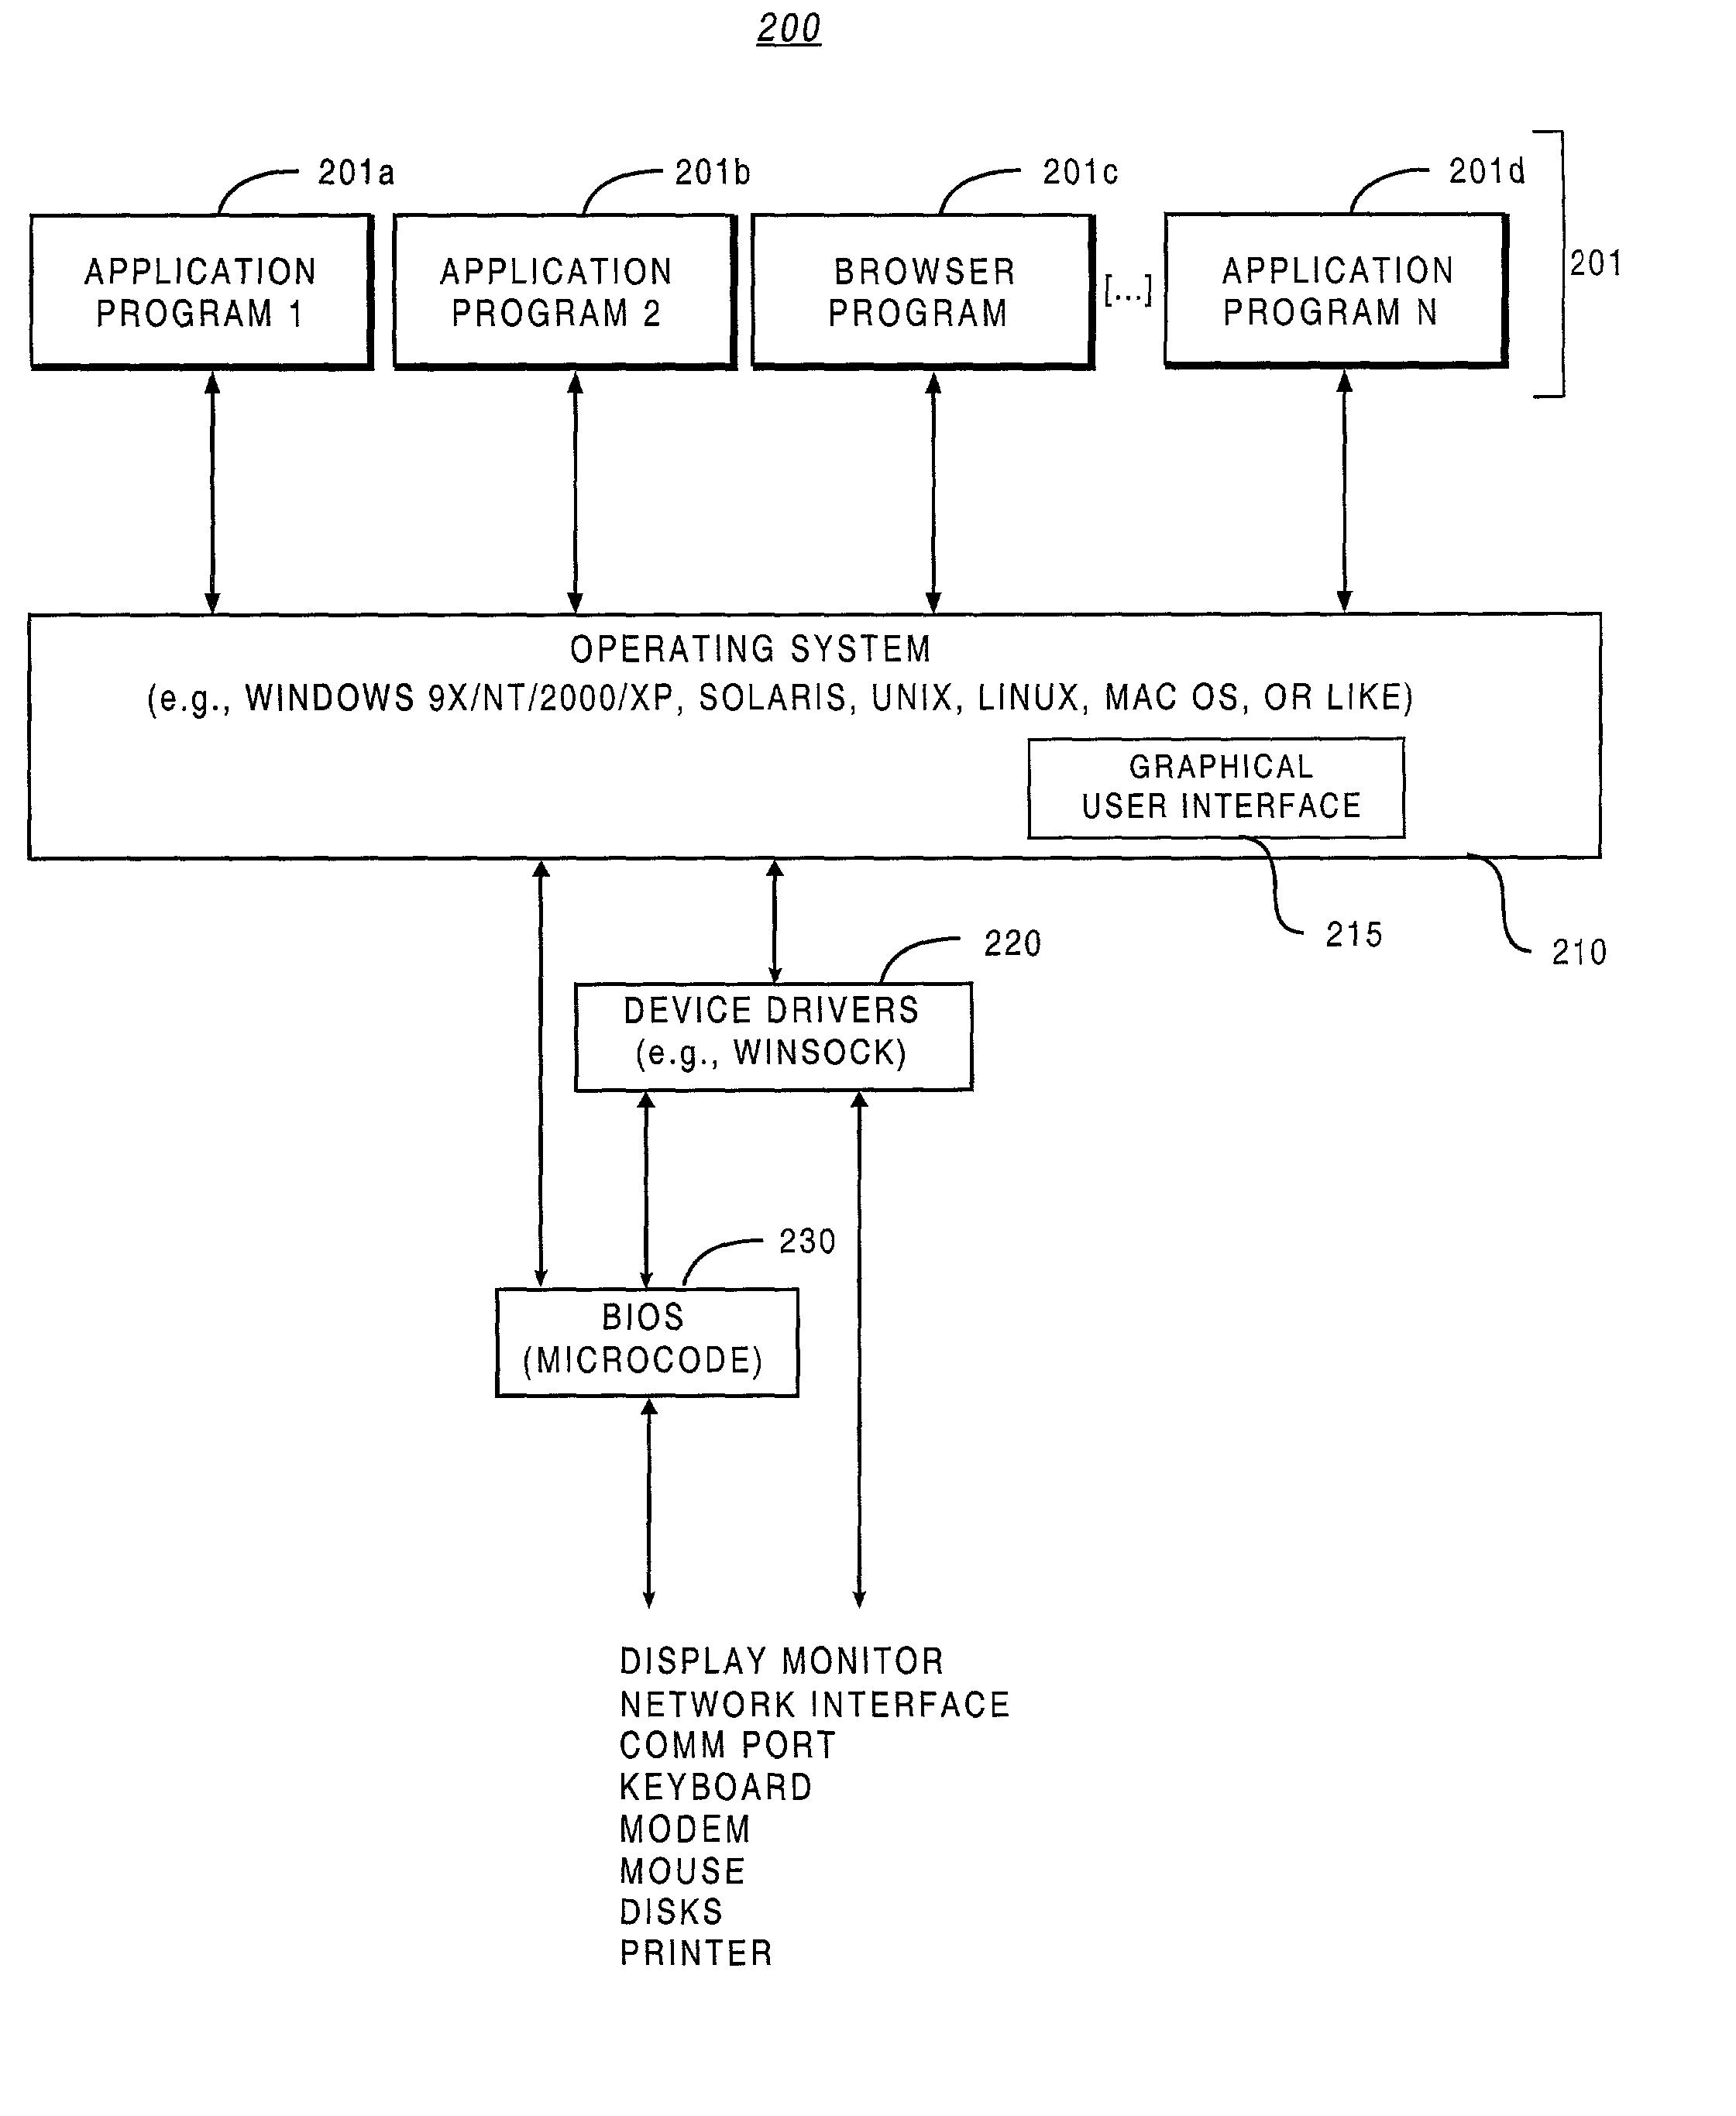 Relational database system providing XML query support